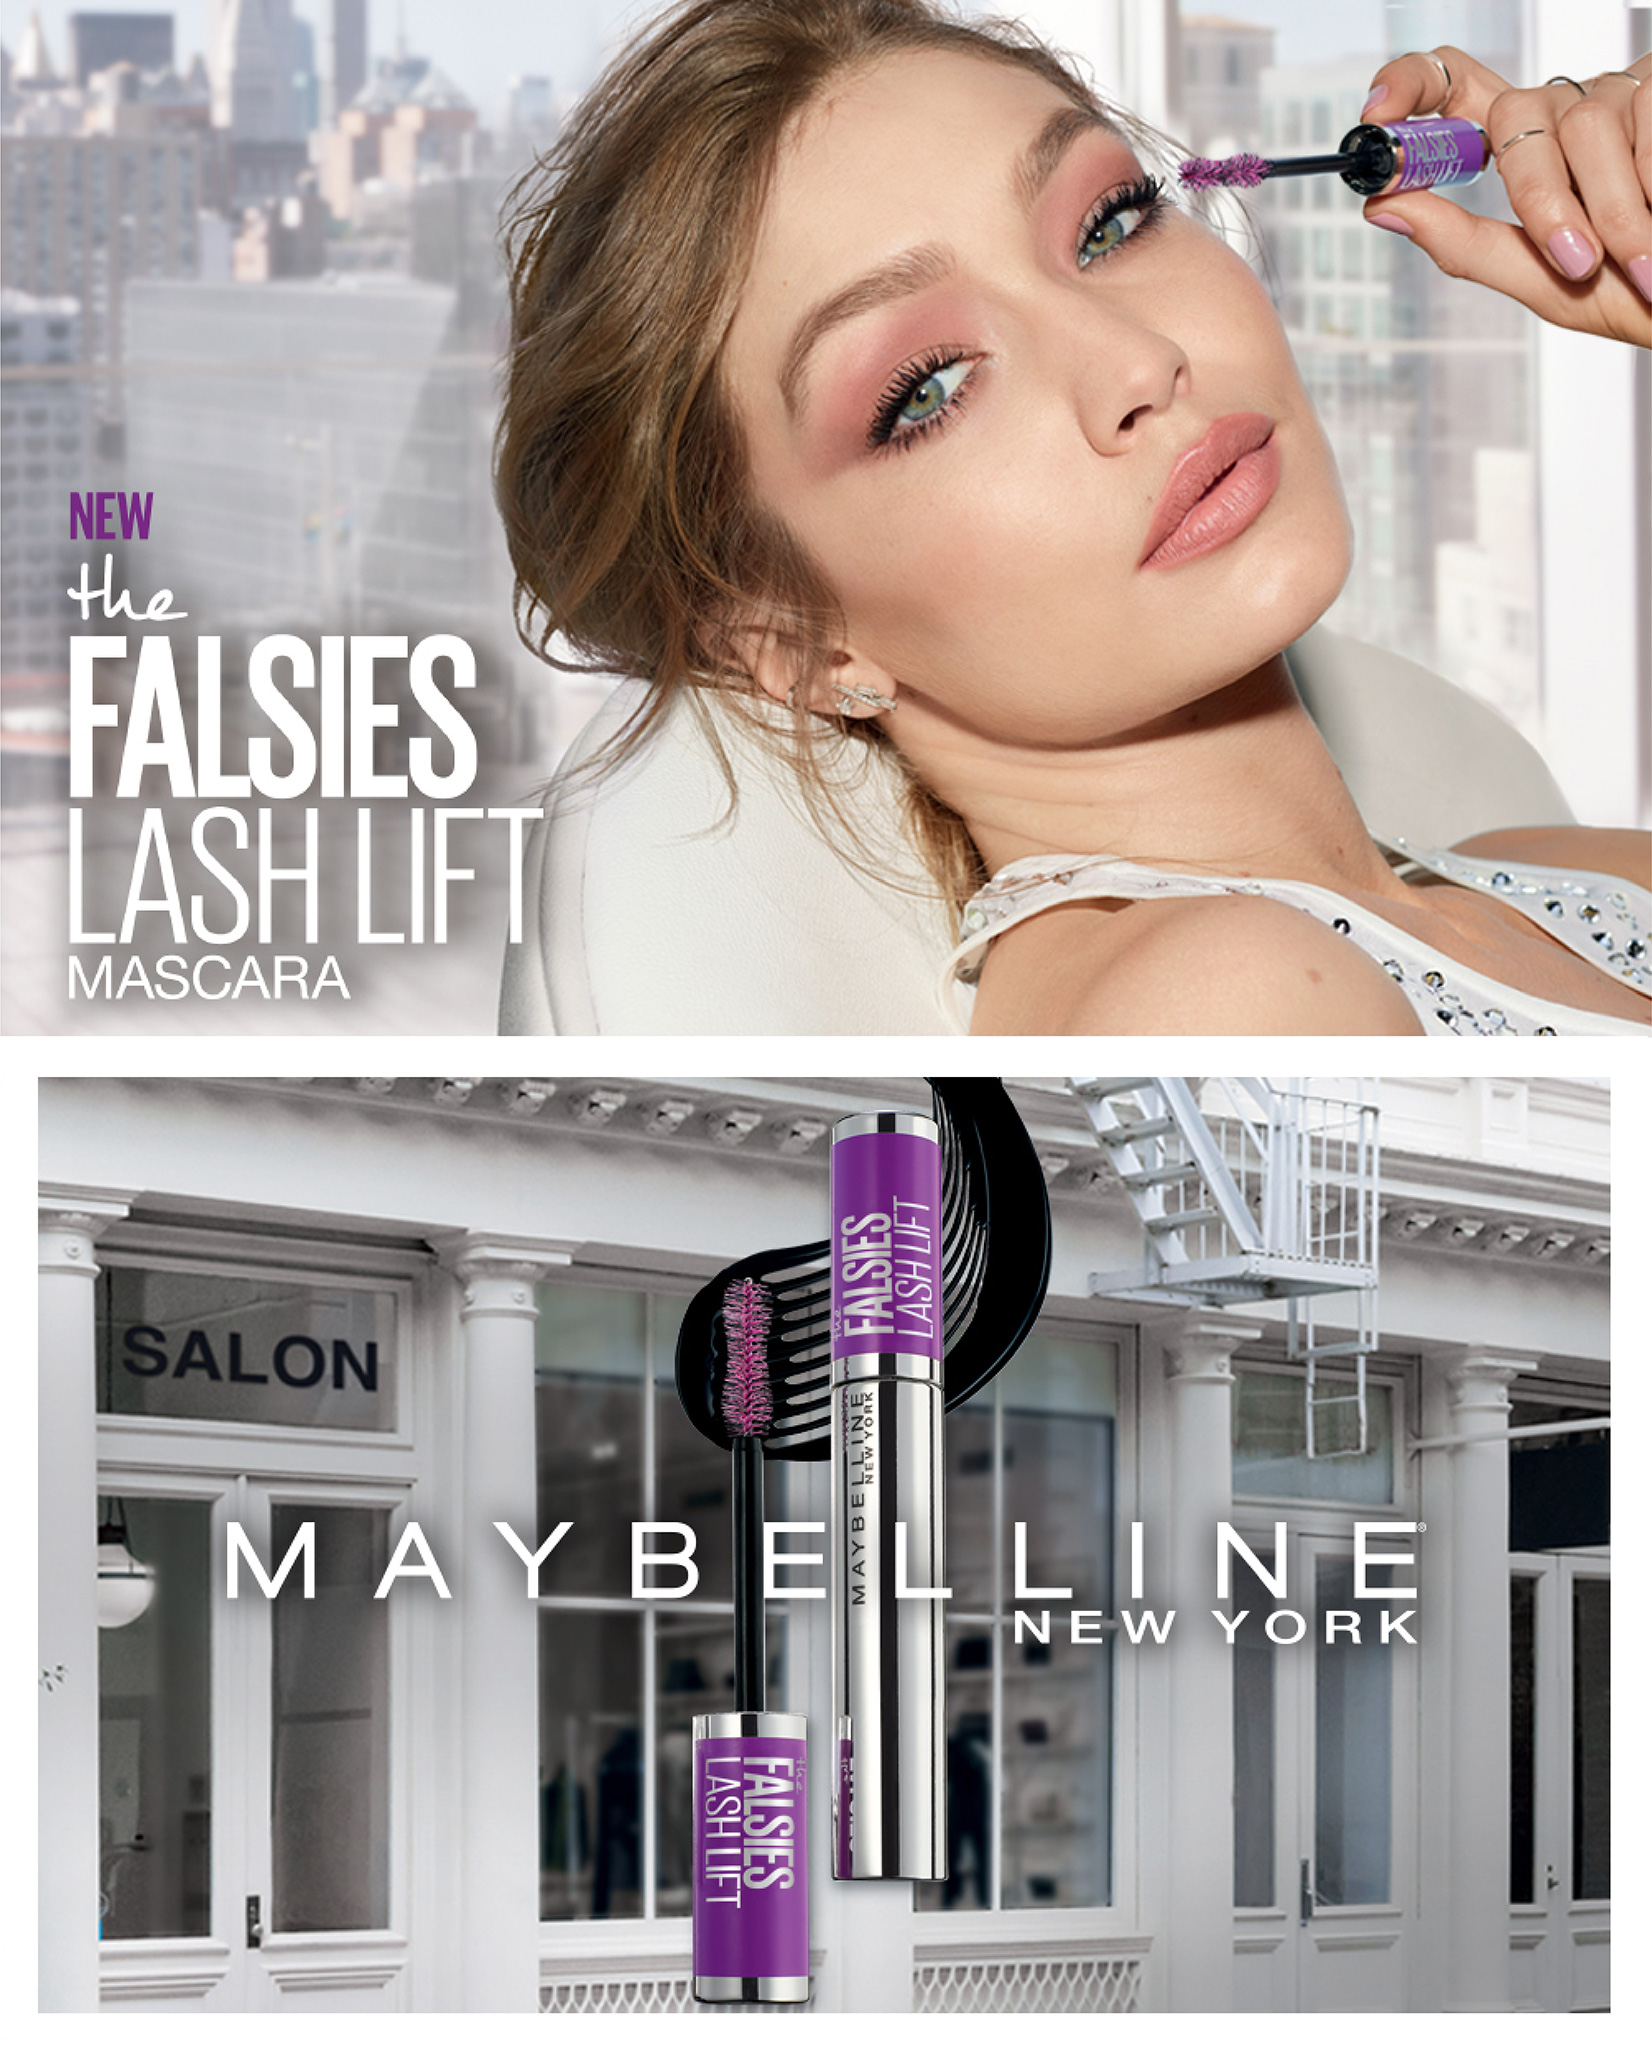 Falsies lash lift mascara by Maybelline philippines : review - Eye